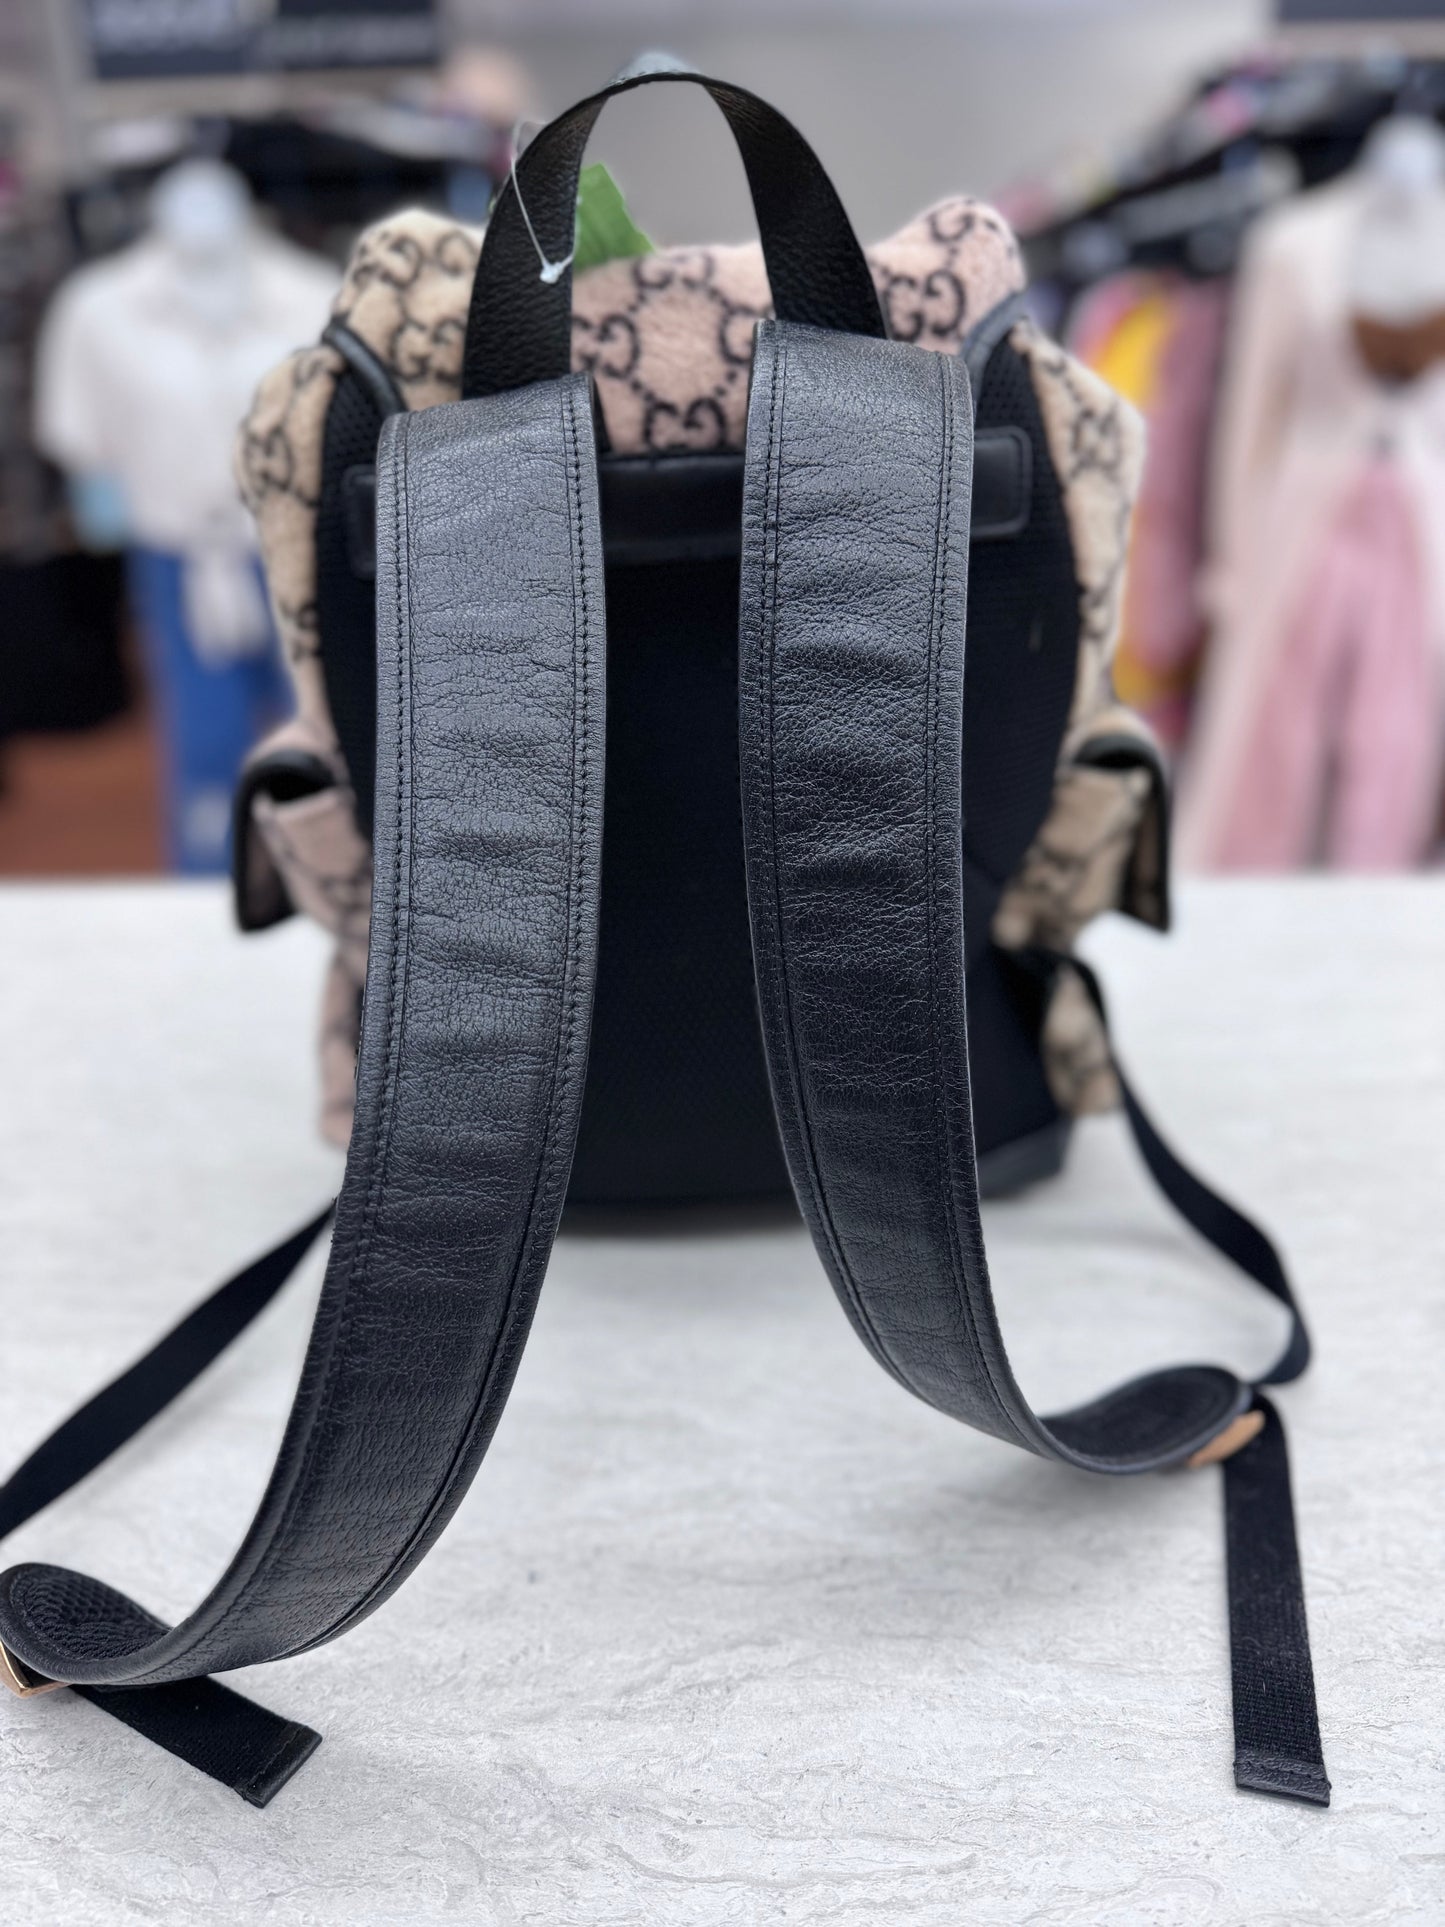 Backpack Luxury Designer By Gucci  Size: Medium